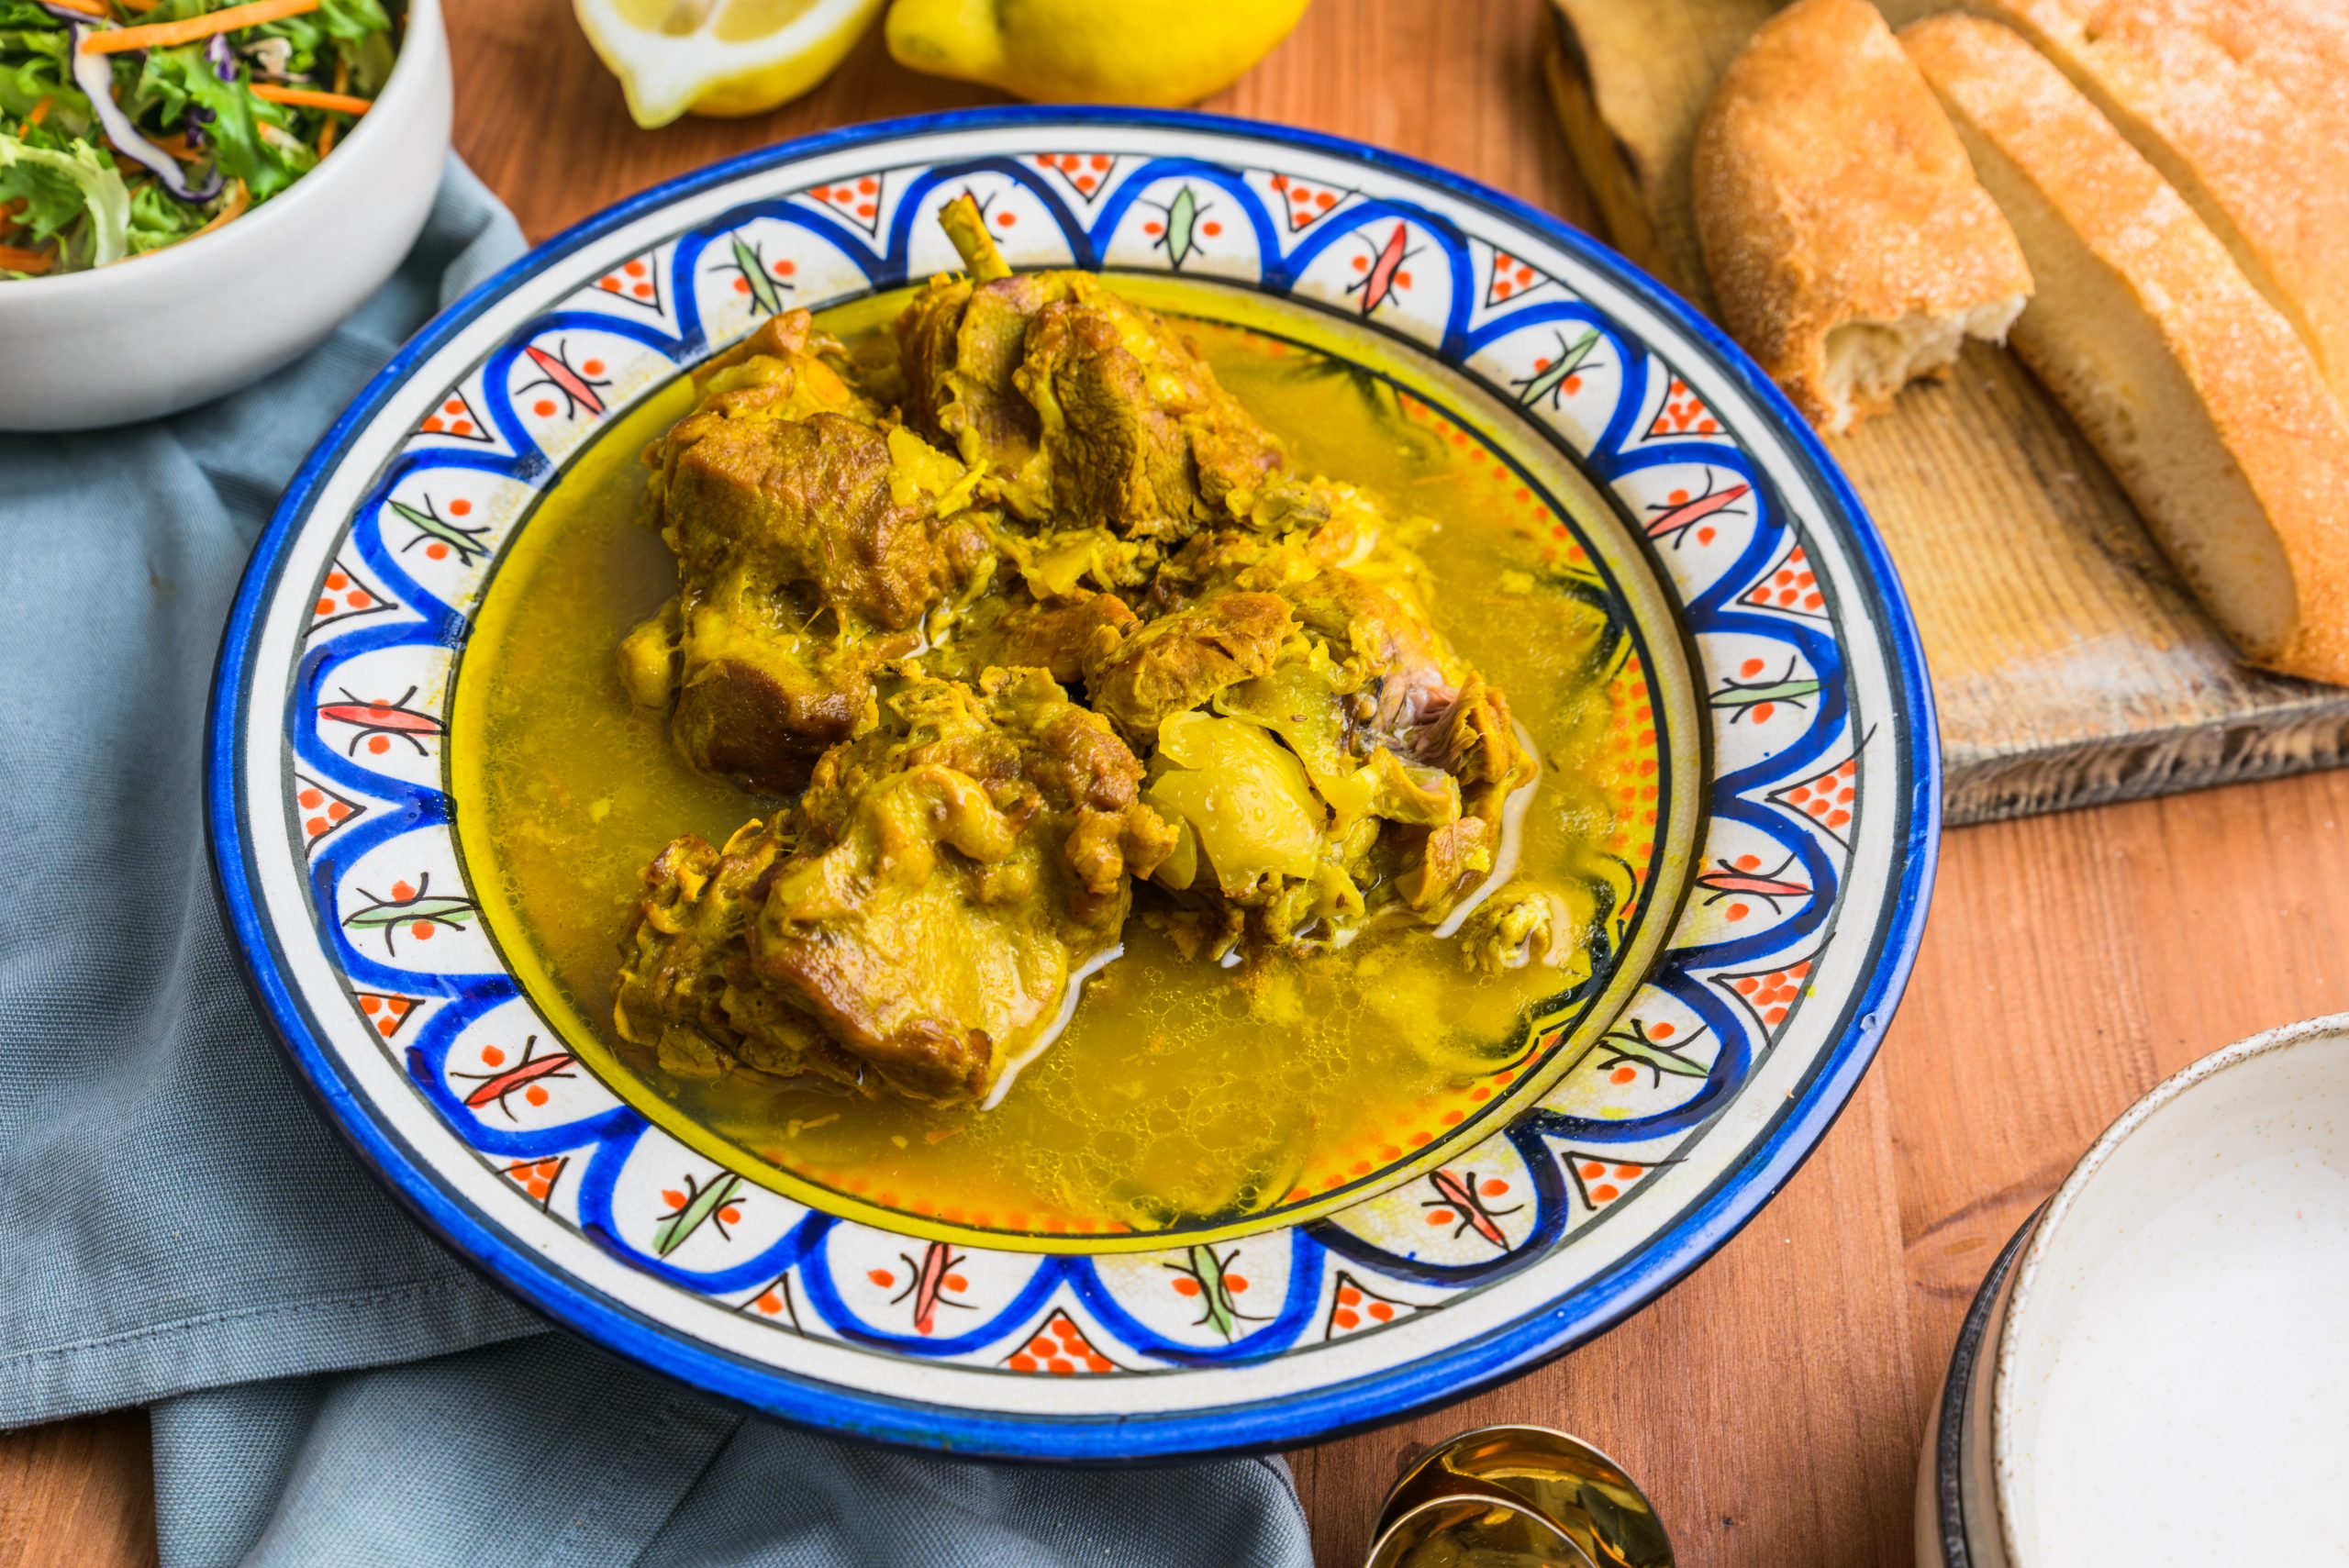 Marrakechi Tangia served in a plate